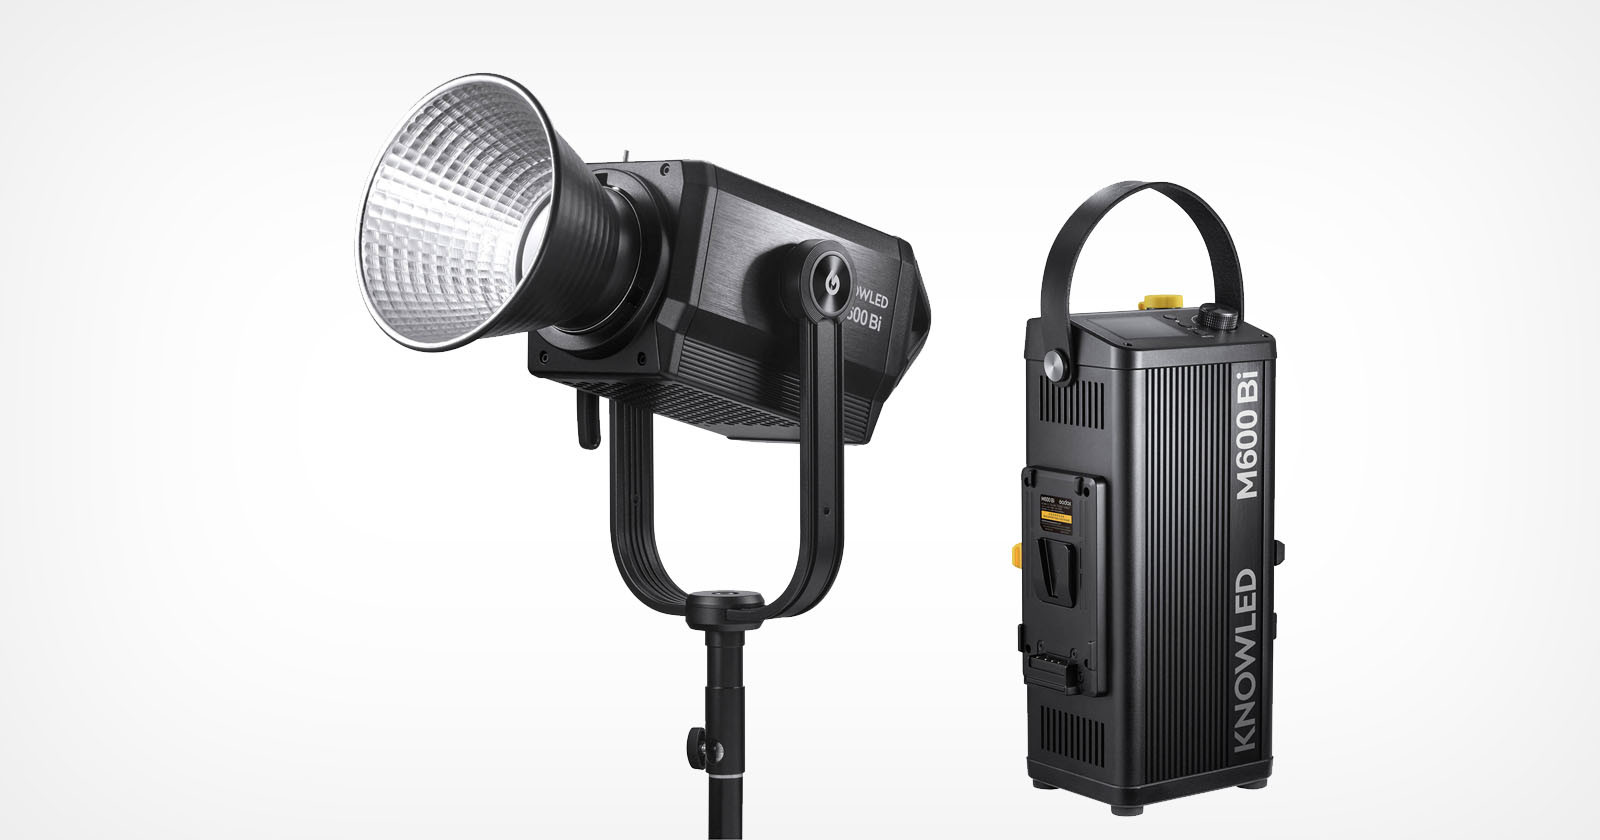 The Godox M600Bi BiColor LED is Brighter and has Touchscreen Controls